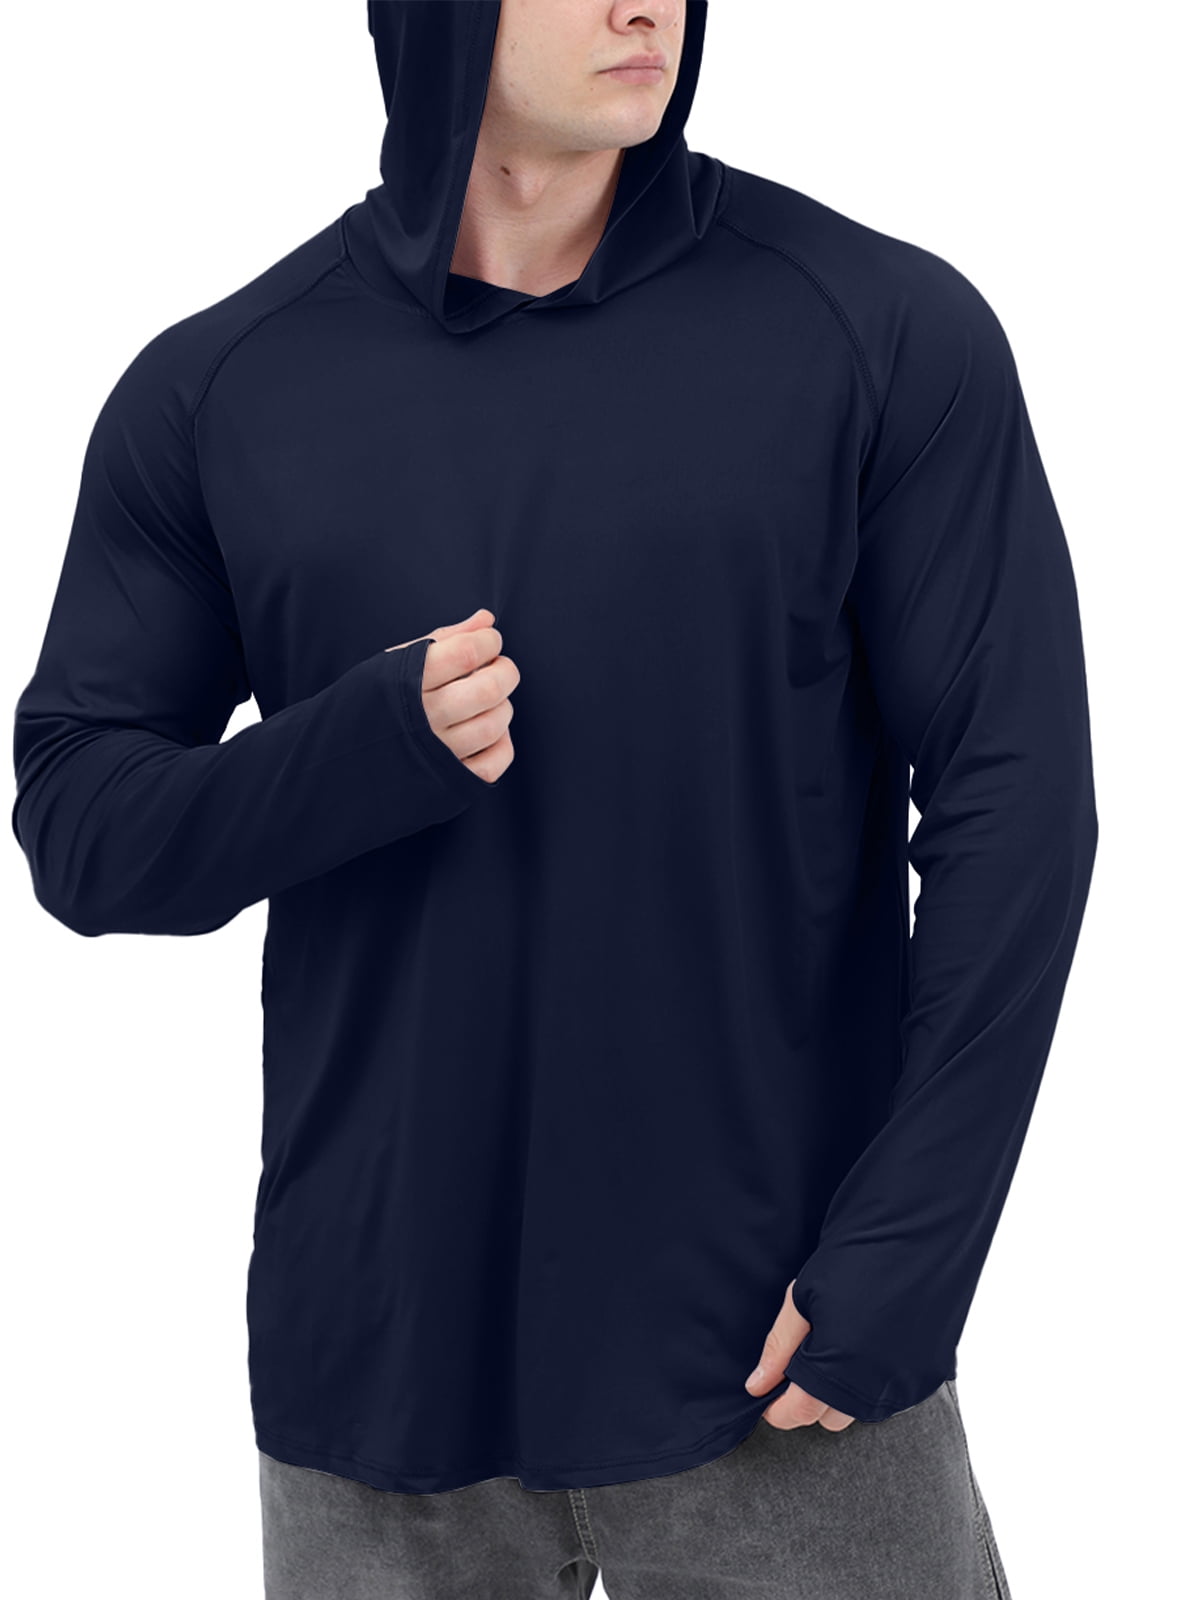 Men's UPF 50+ Sun Protection Hooded Shirt With Mask, Active Slightly Stretch Long Sleeve Rash Guard For Fishing Hiking Outdoor